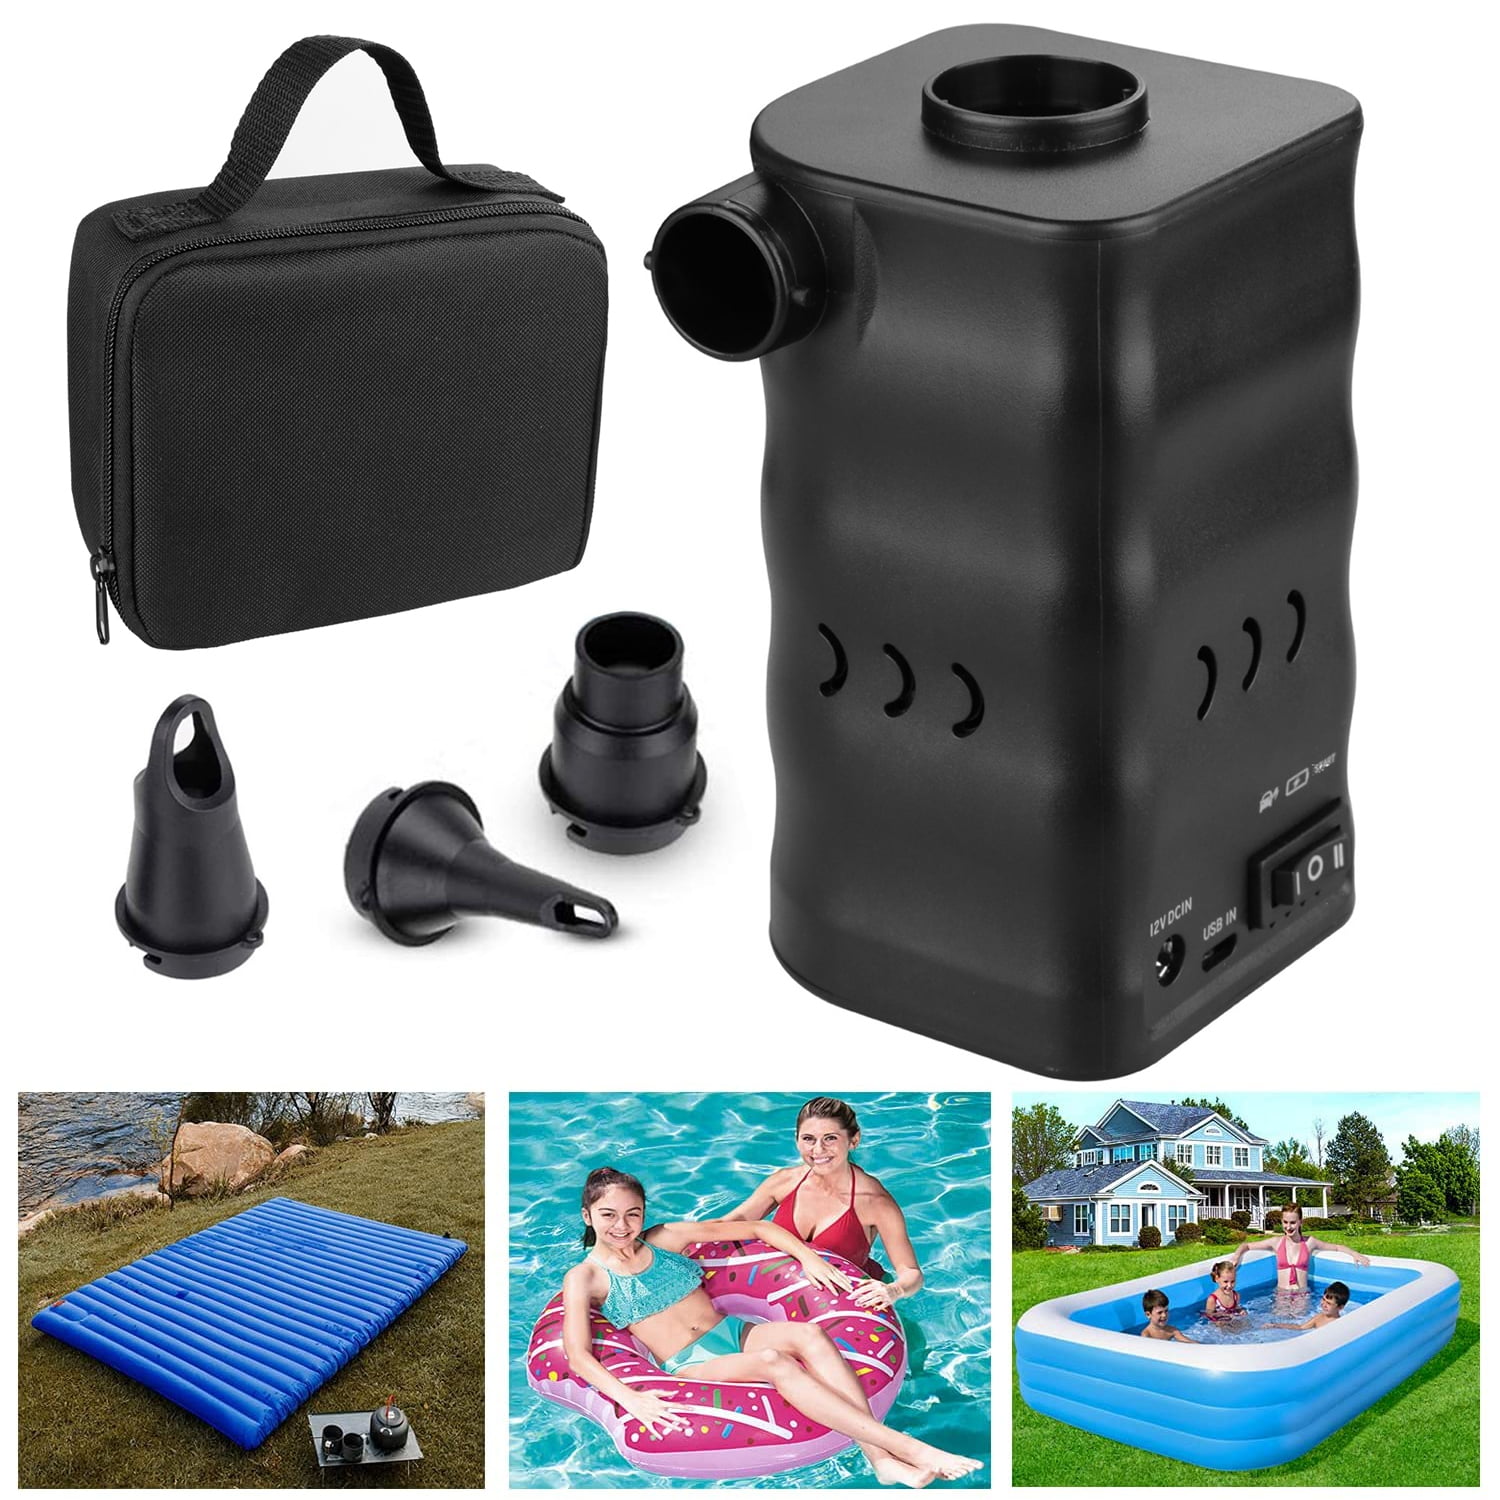 Car Electric Air Pump Injection Compressor Inflatable Mattress Camping Travel 